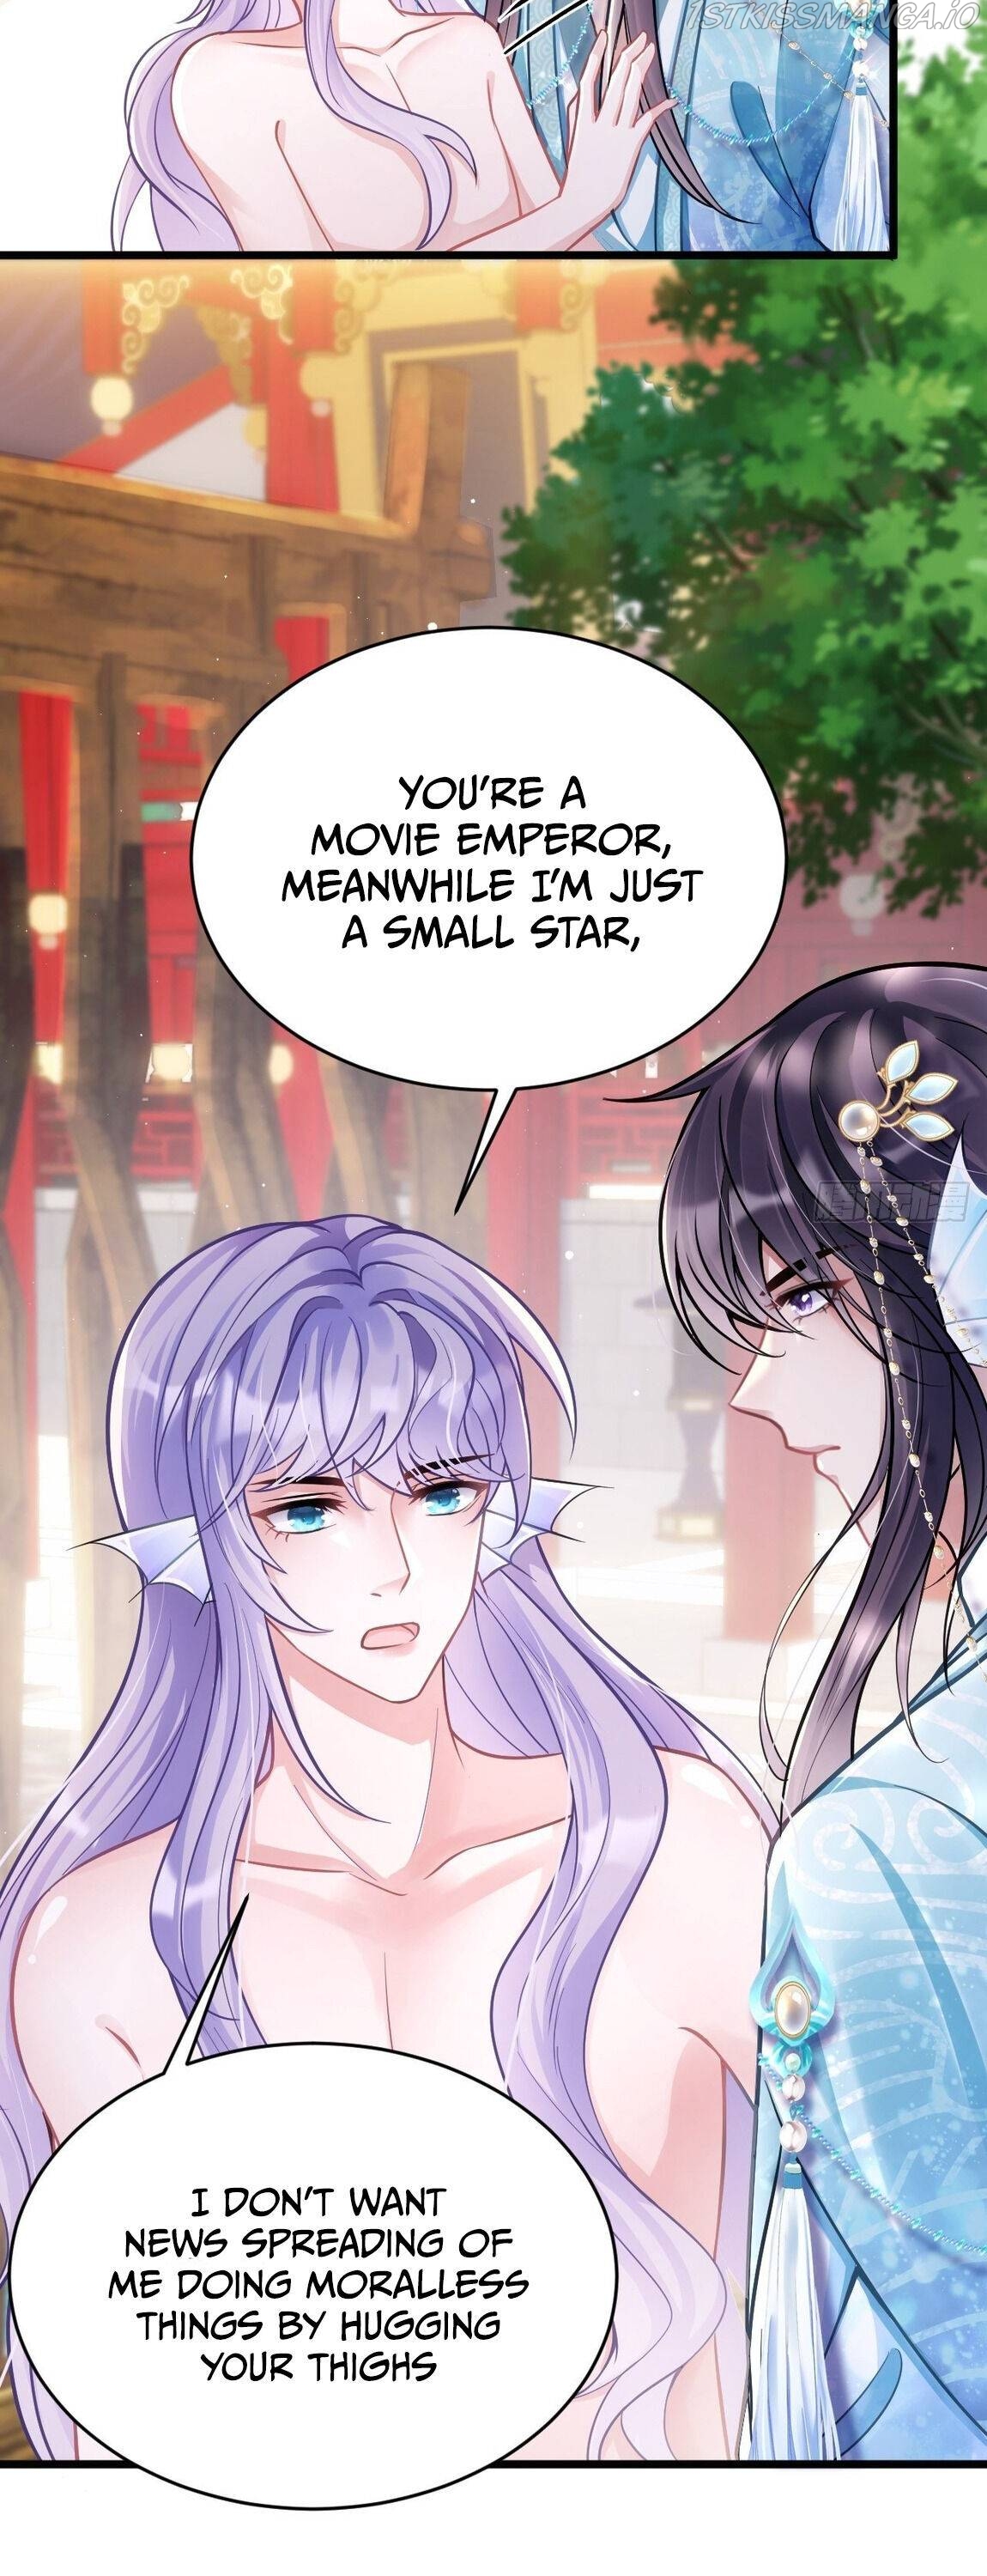 I suspect the movie emperor is luring me chapter 4